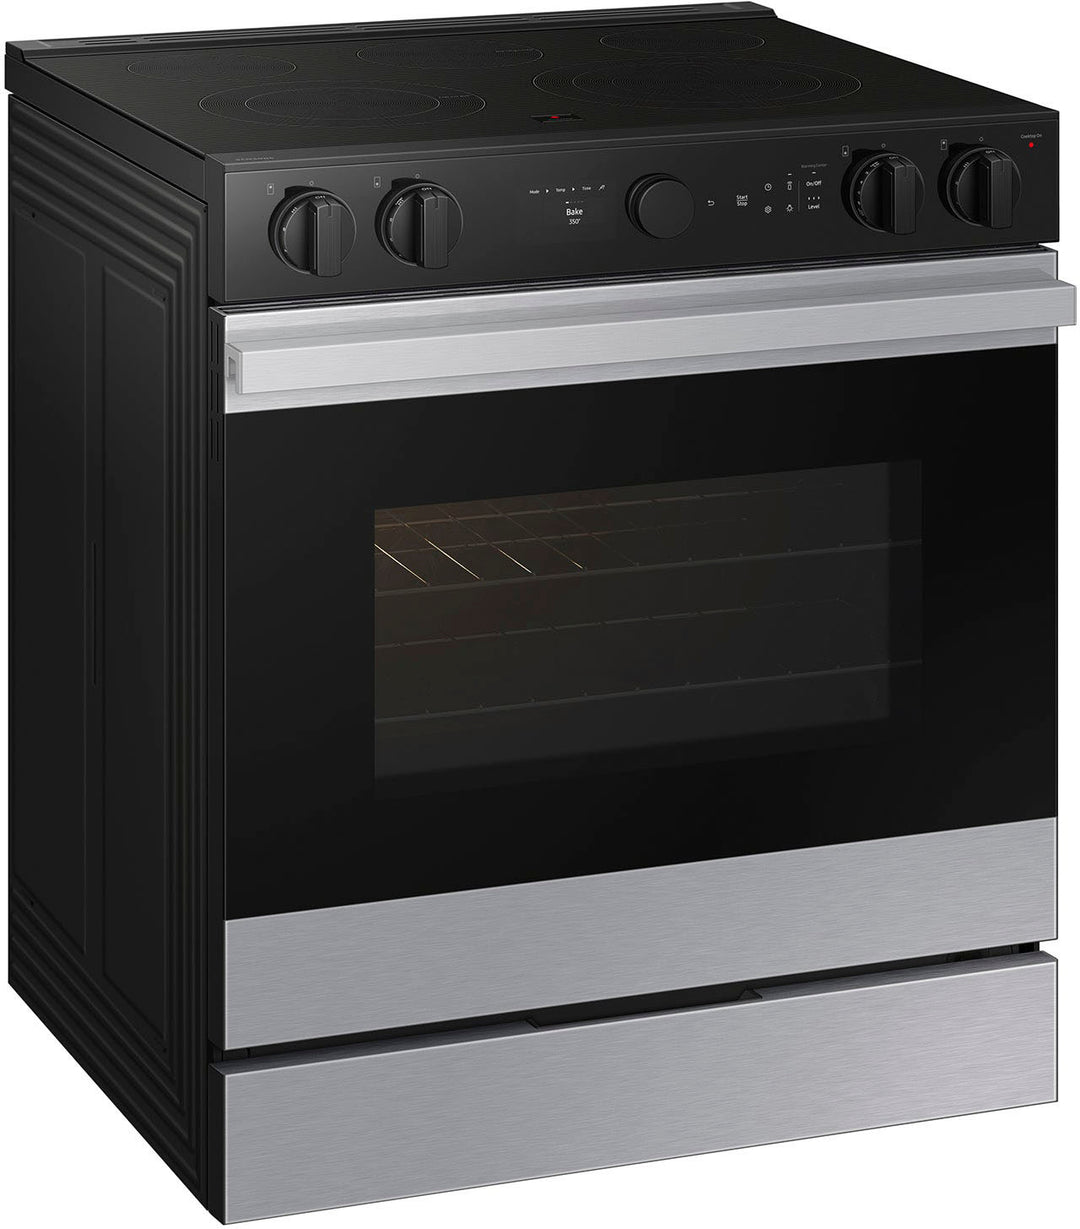 Samsung - Bespoke 6.3 Cu. Ft. Slide-In Electric Range with Air Sous Vide - Stainless Steel_1